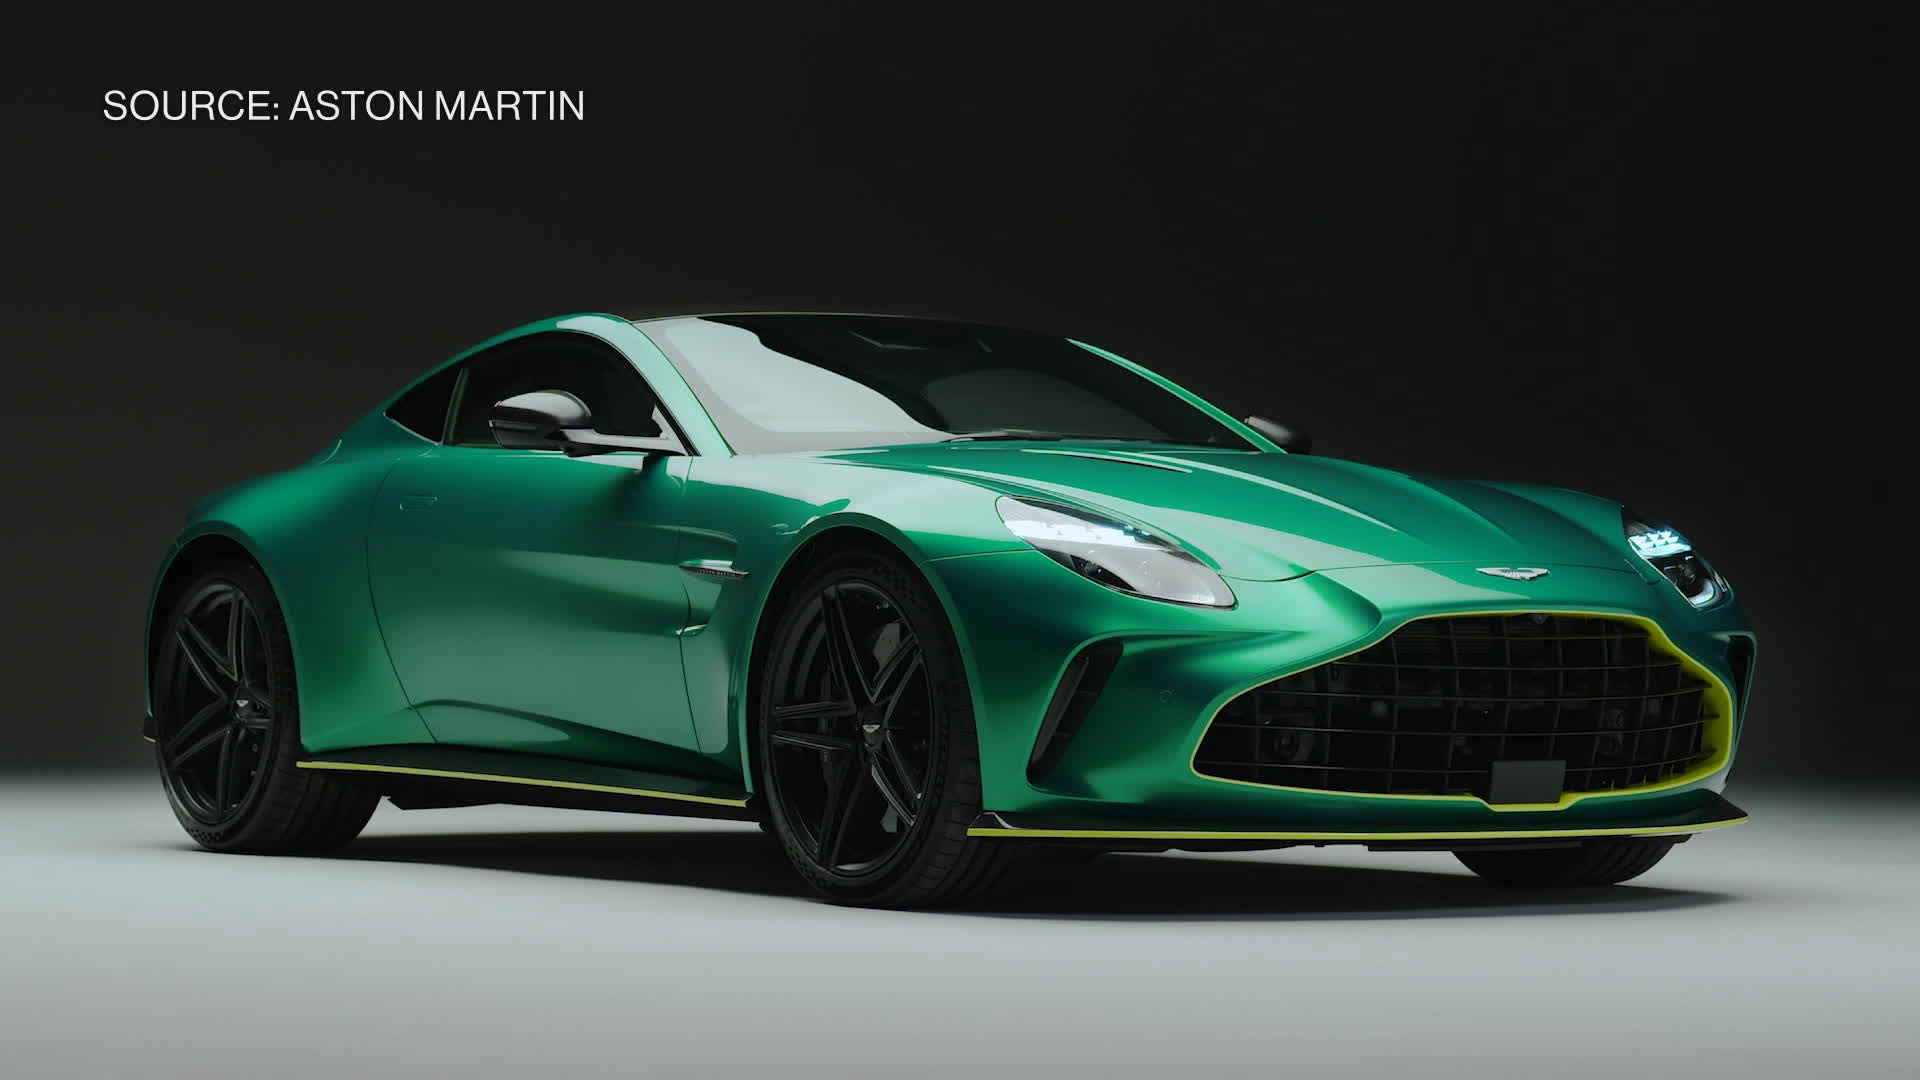 Watch Aston Martin Launches New Vantage, F1 Cars - Bloomberg